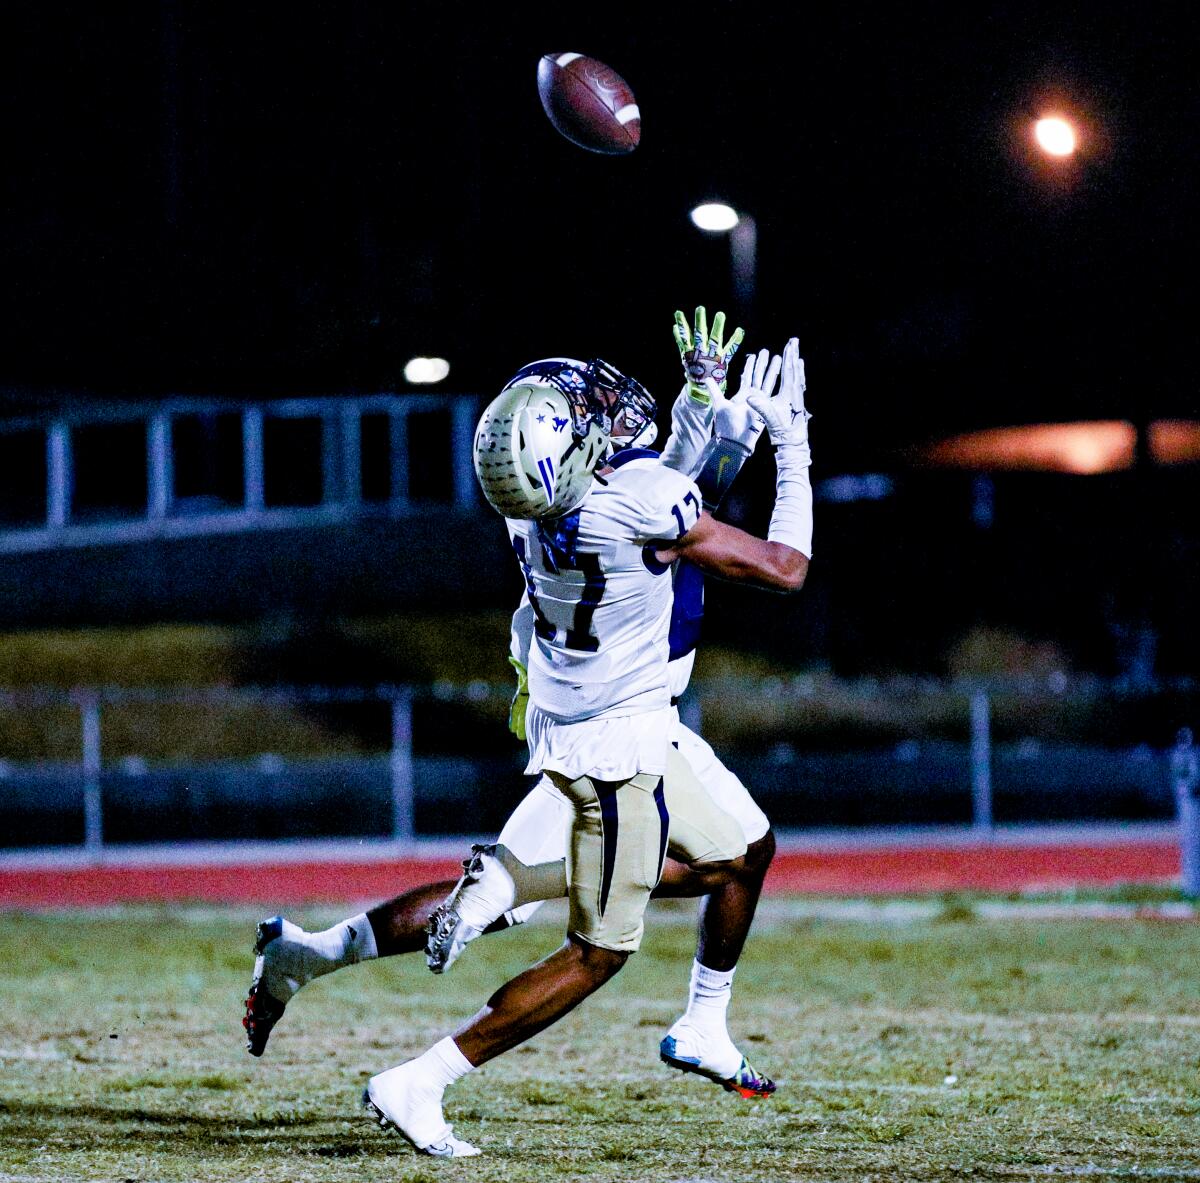 Peyton Waters of Birmingham looks like he's going to make a great catch. He does to make an interception against Venice.